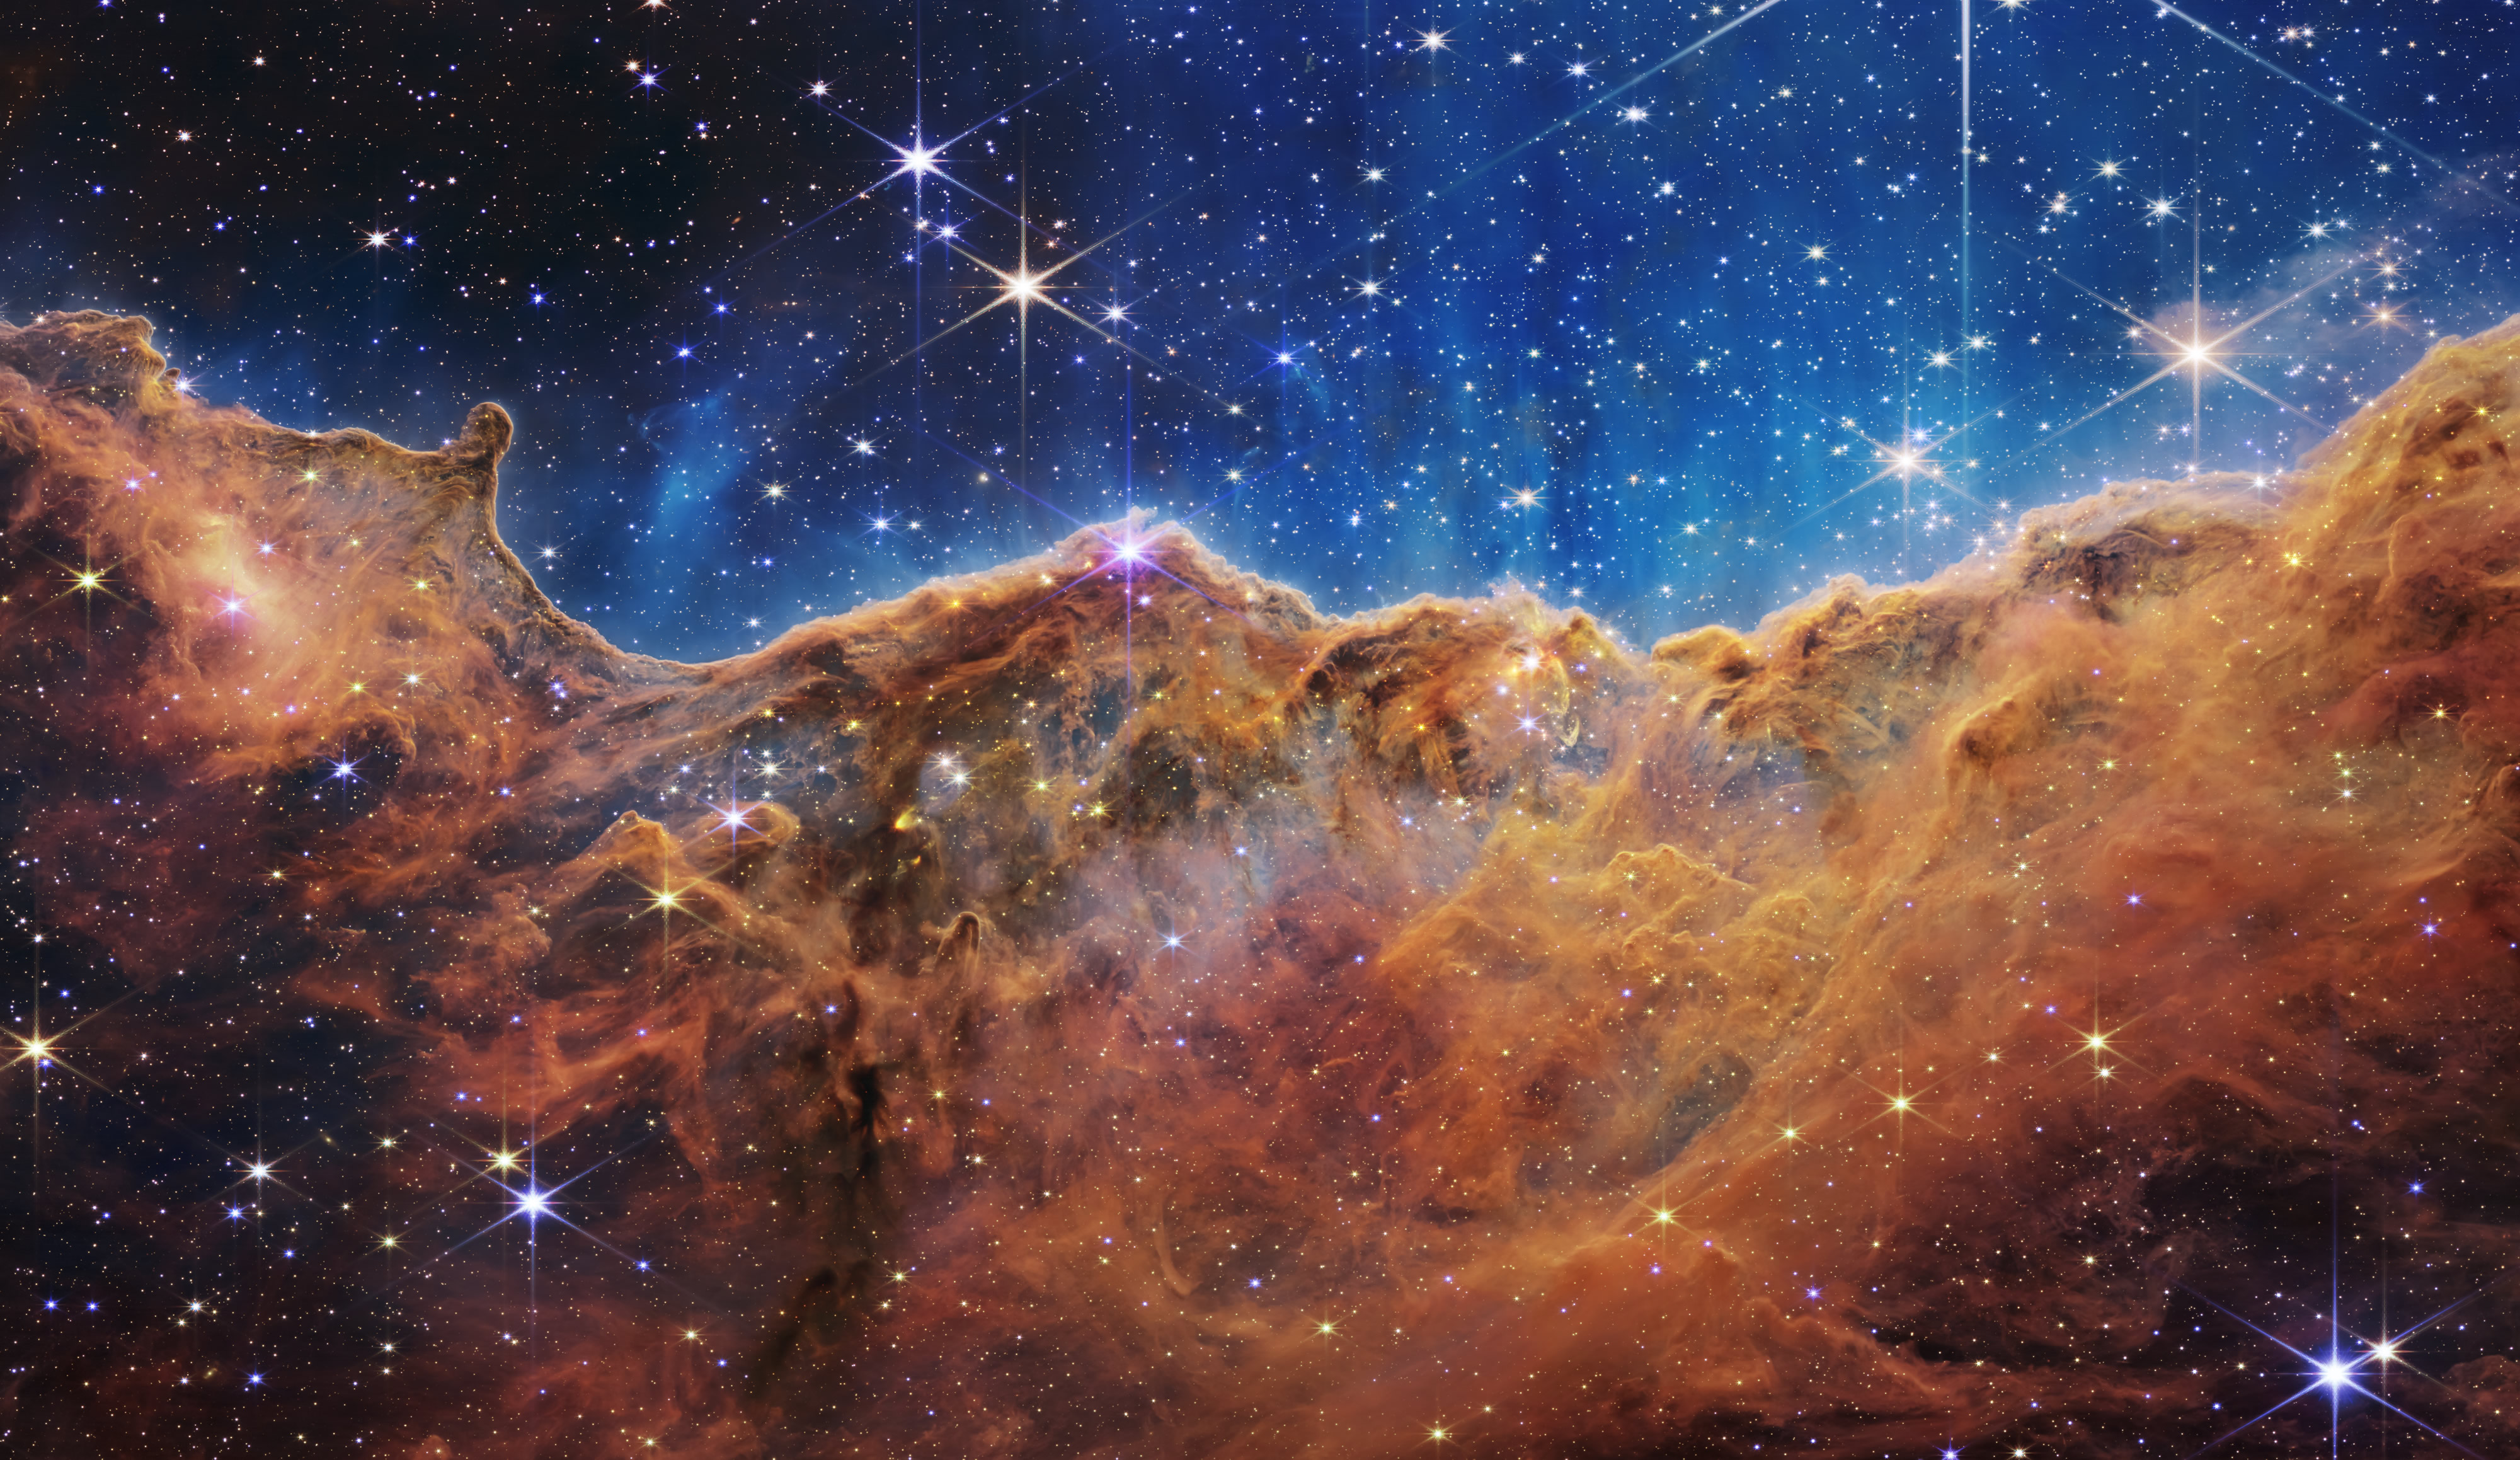 Image from the James Webb Space Telescope of a star forming region in Carina Nebula. The bottom 75% of the image is orange clouds that look like cliffs and mountains. In the top 25% is a blue and black canvas with stars and other white specs.